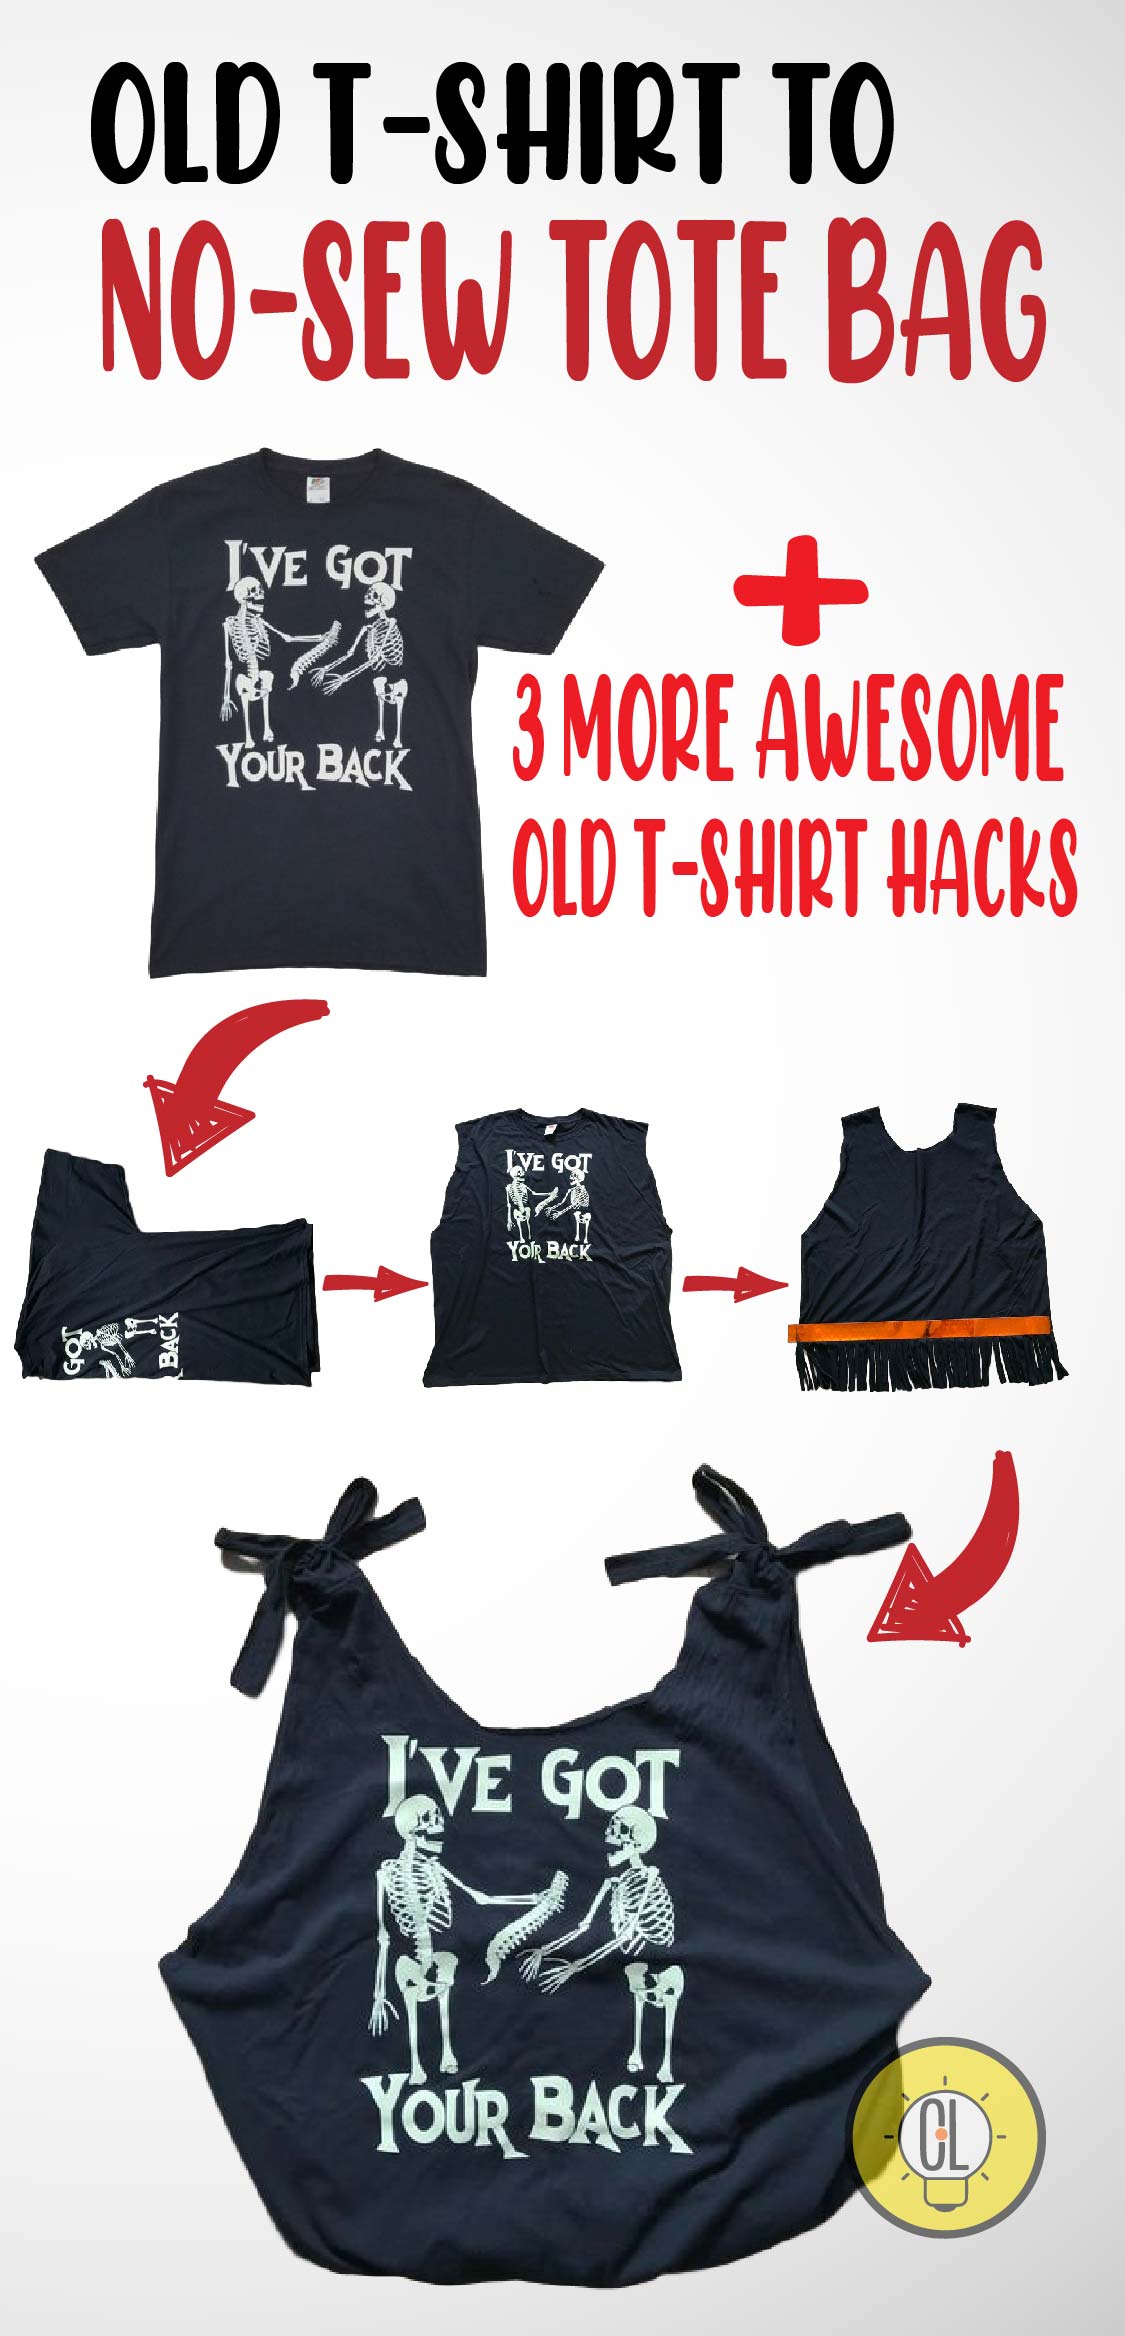 4 ways to repurpose your old t-shrit hacks